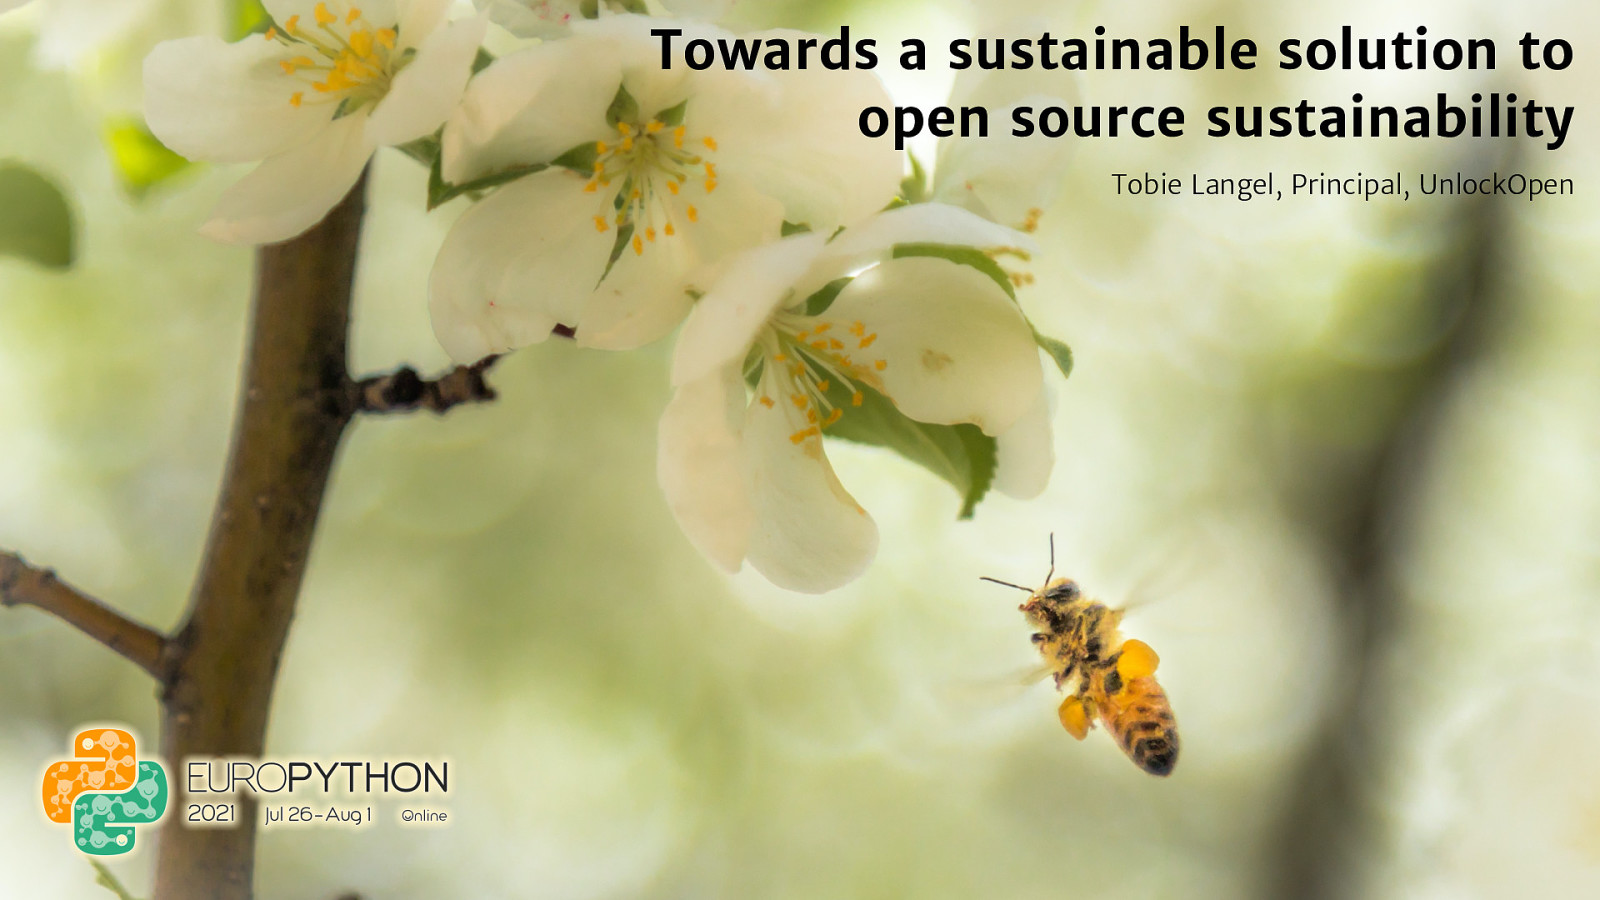 Towards a sustainable solution to open source sustainability